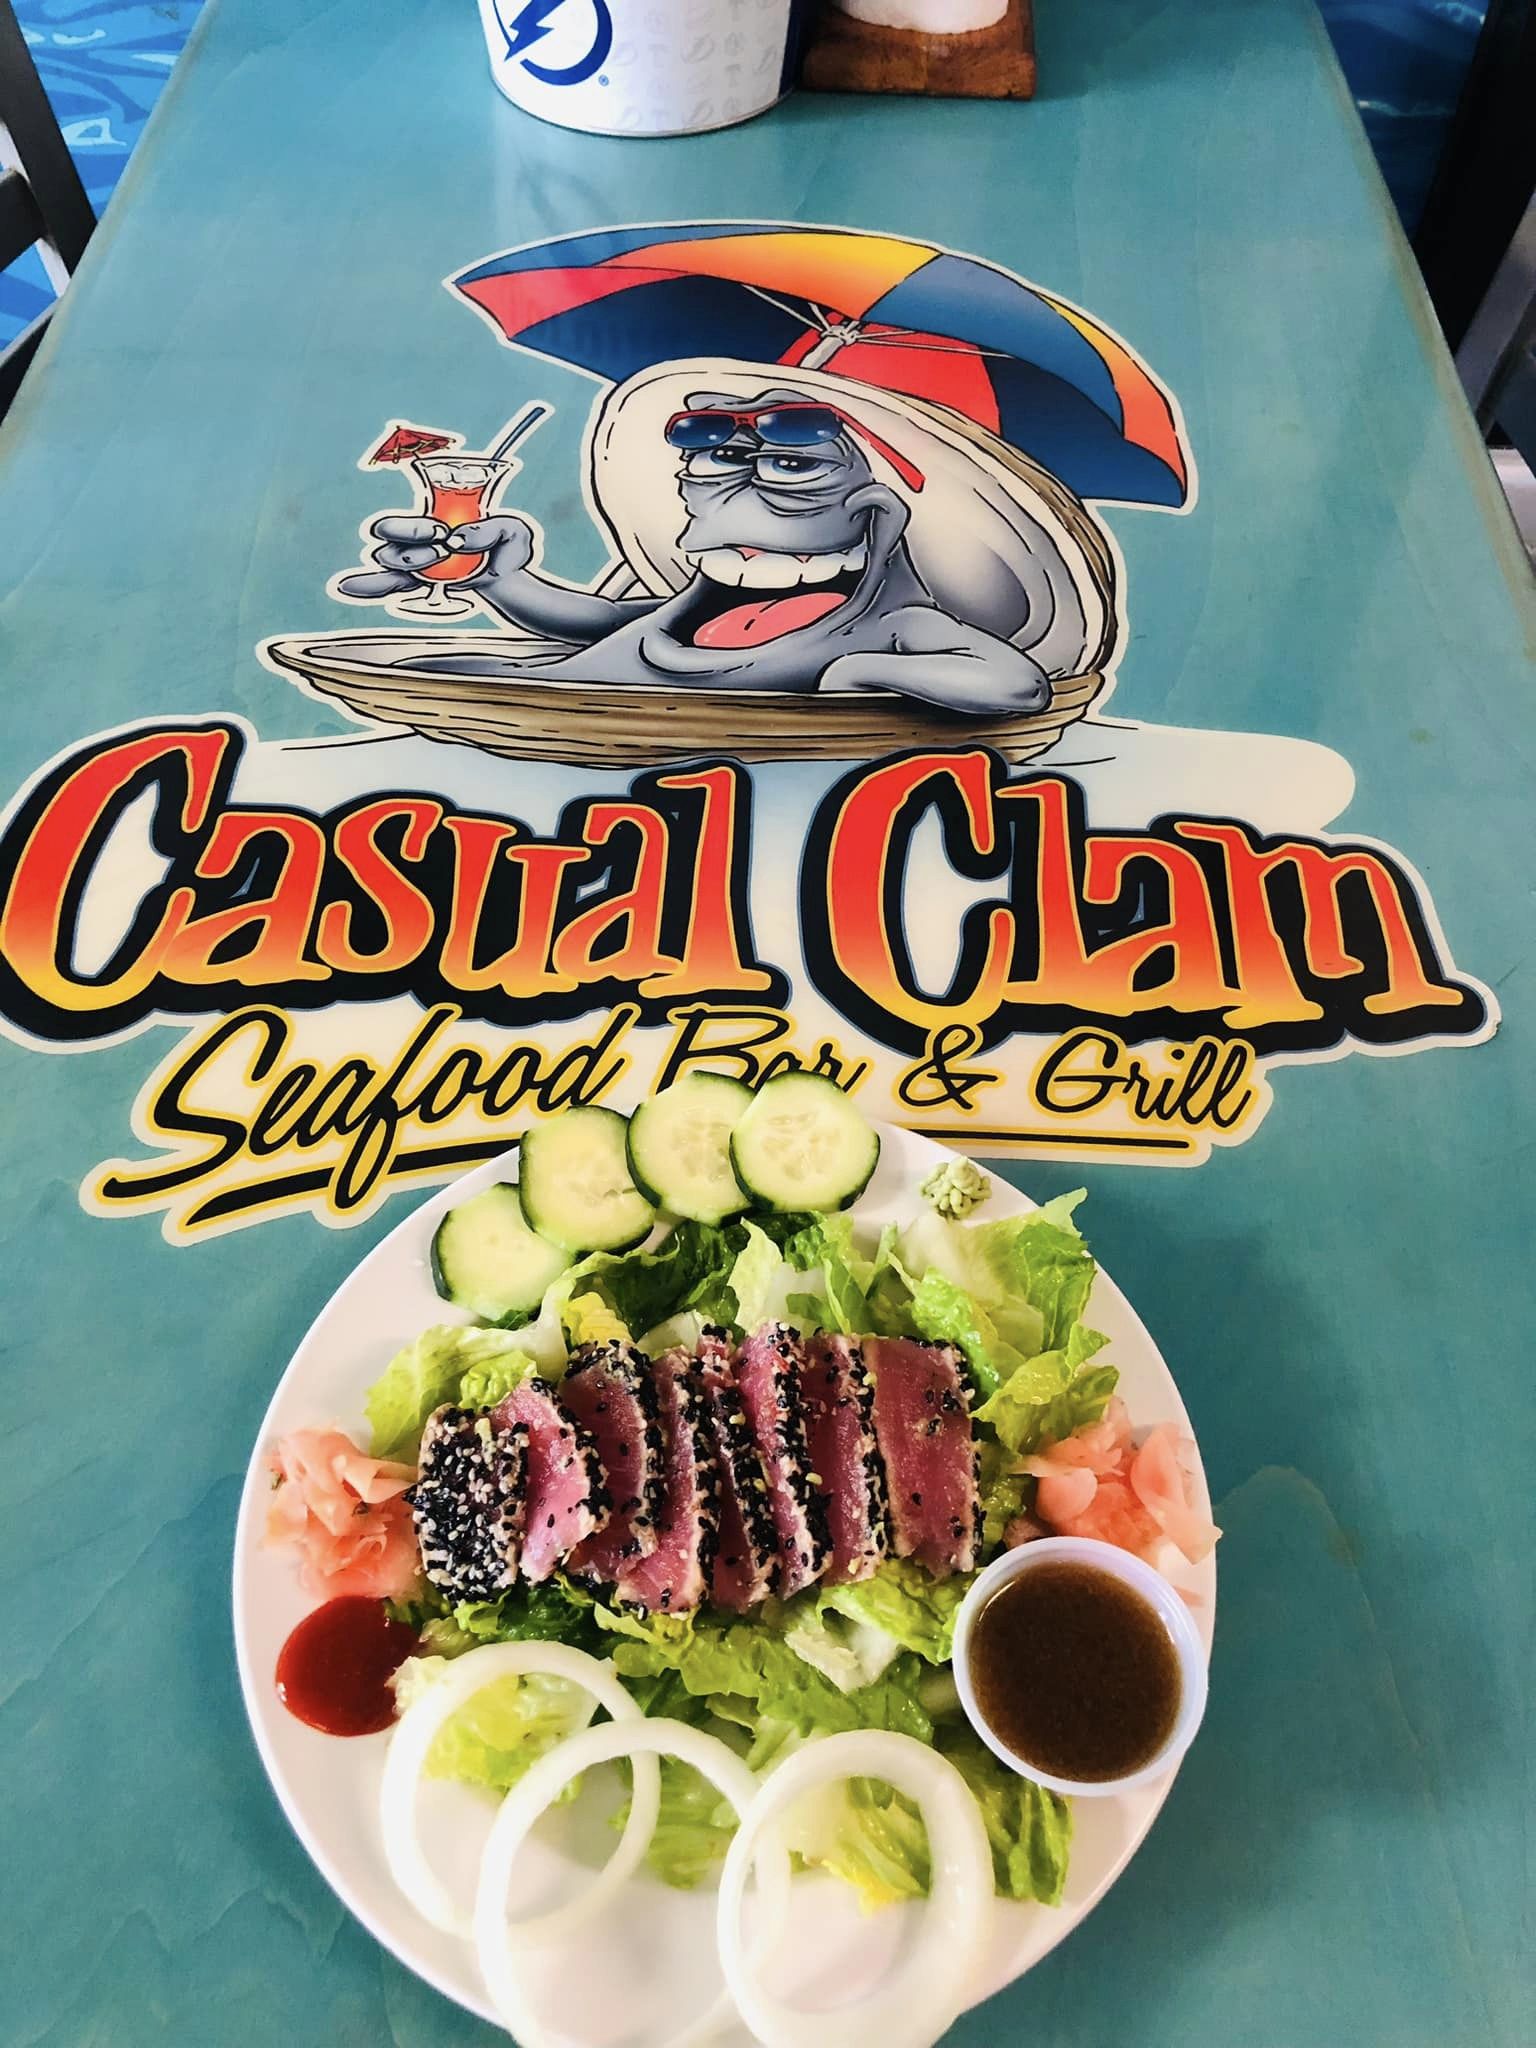 Casual Clam Seafood Bar & Grill